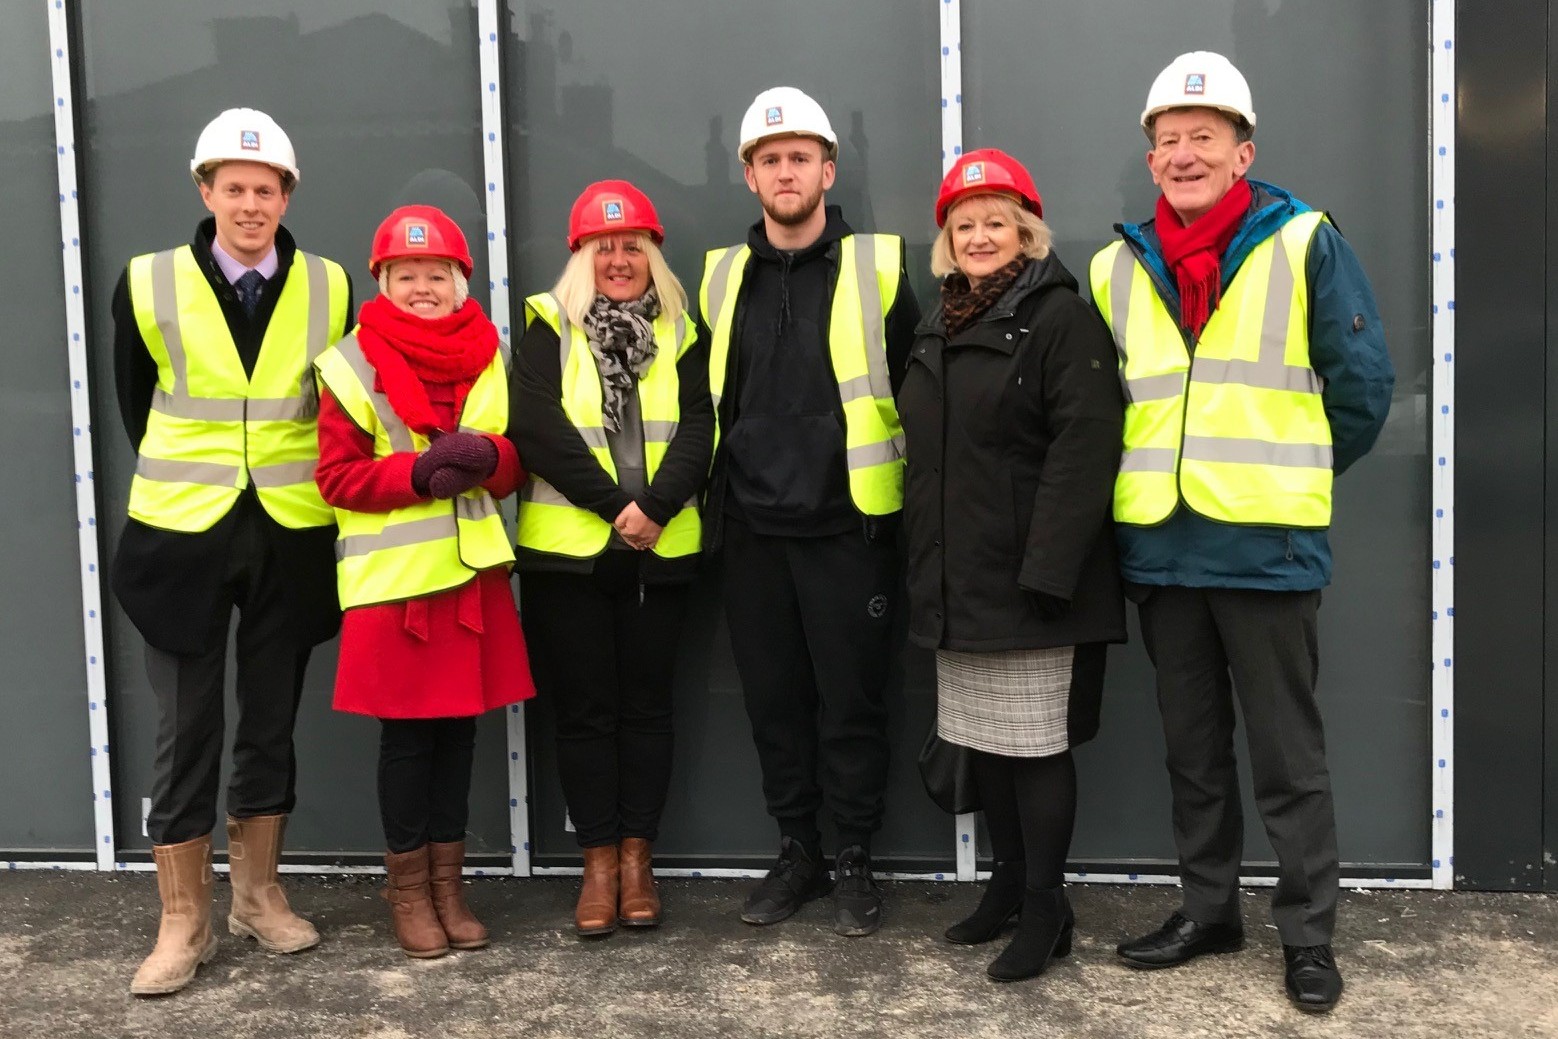 New car park hoped to encourage people to shop local